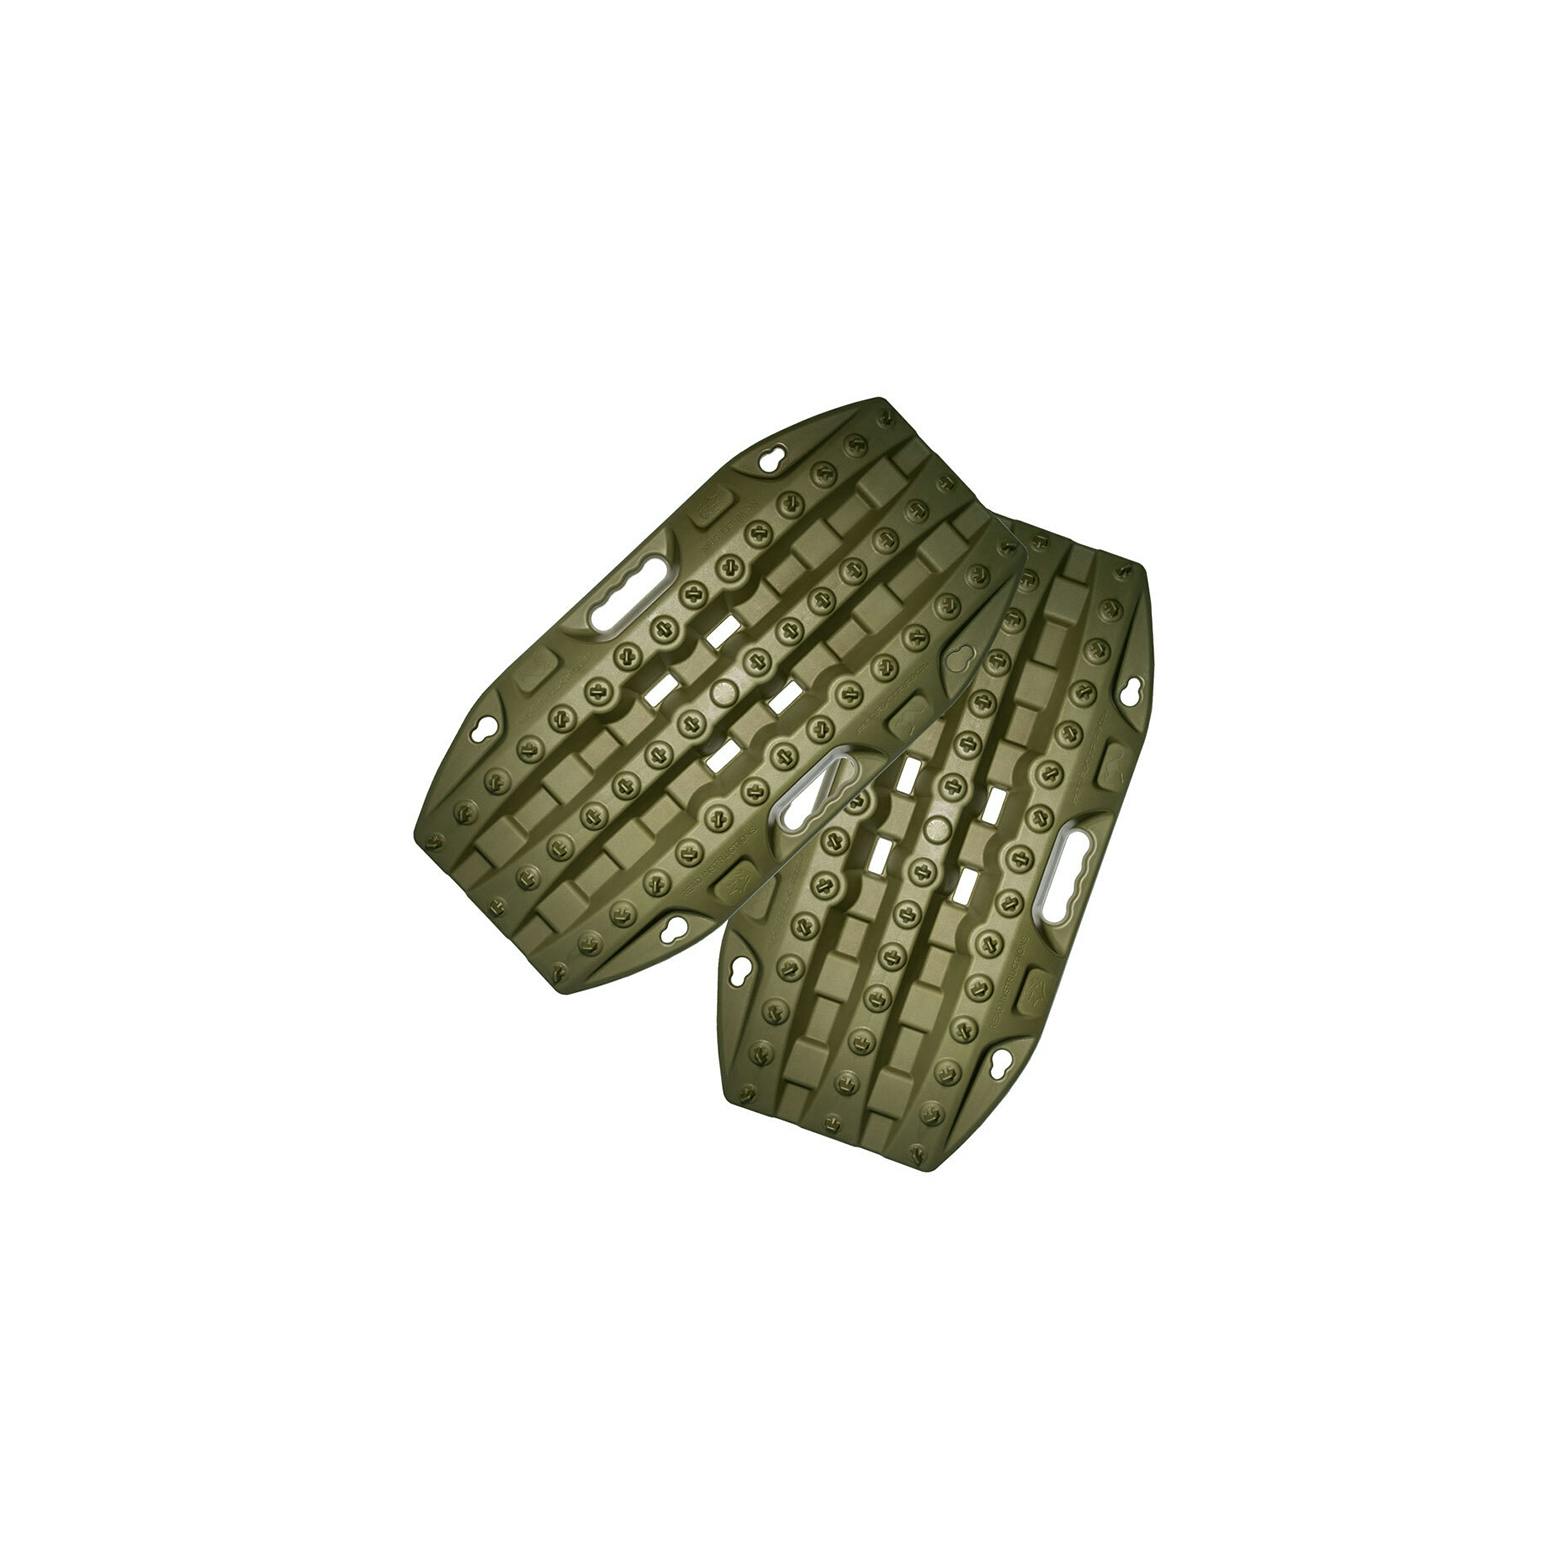 Maxtrax Mini Recovery Boards in Olive Drab on white background